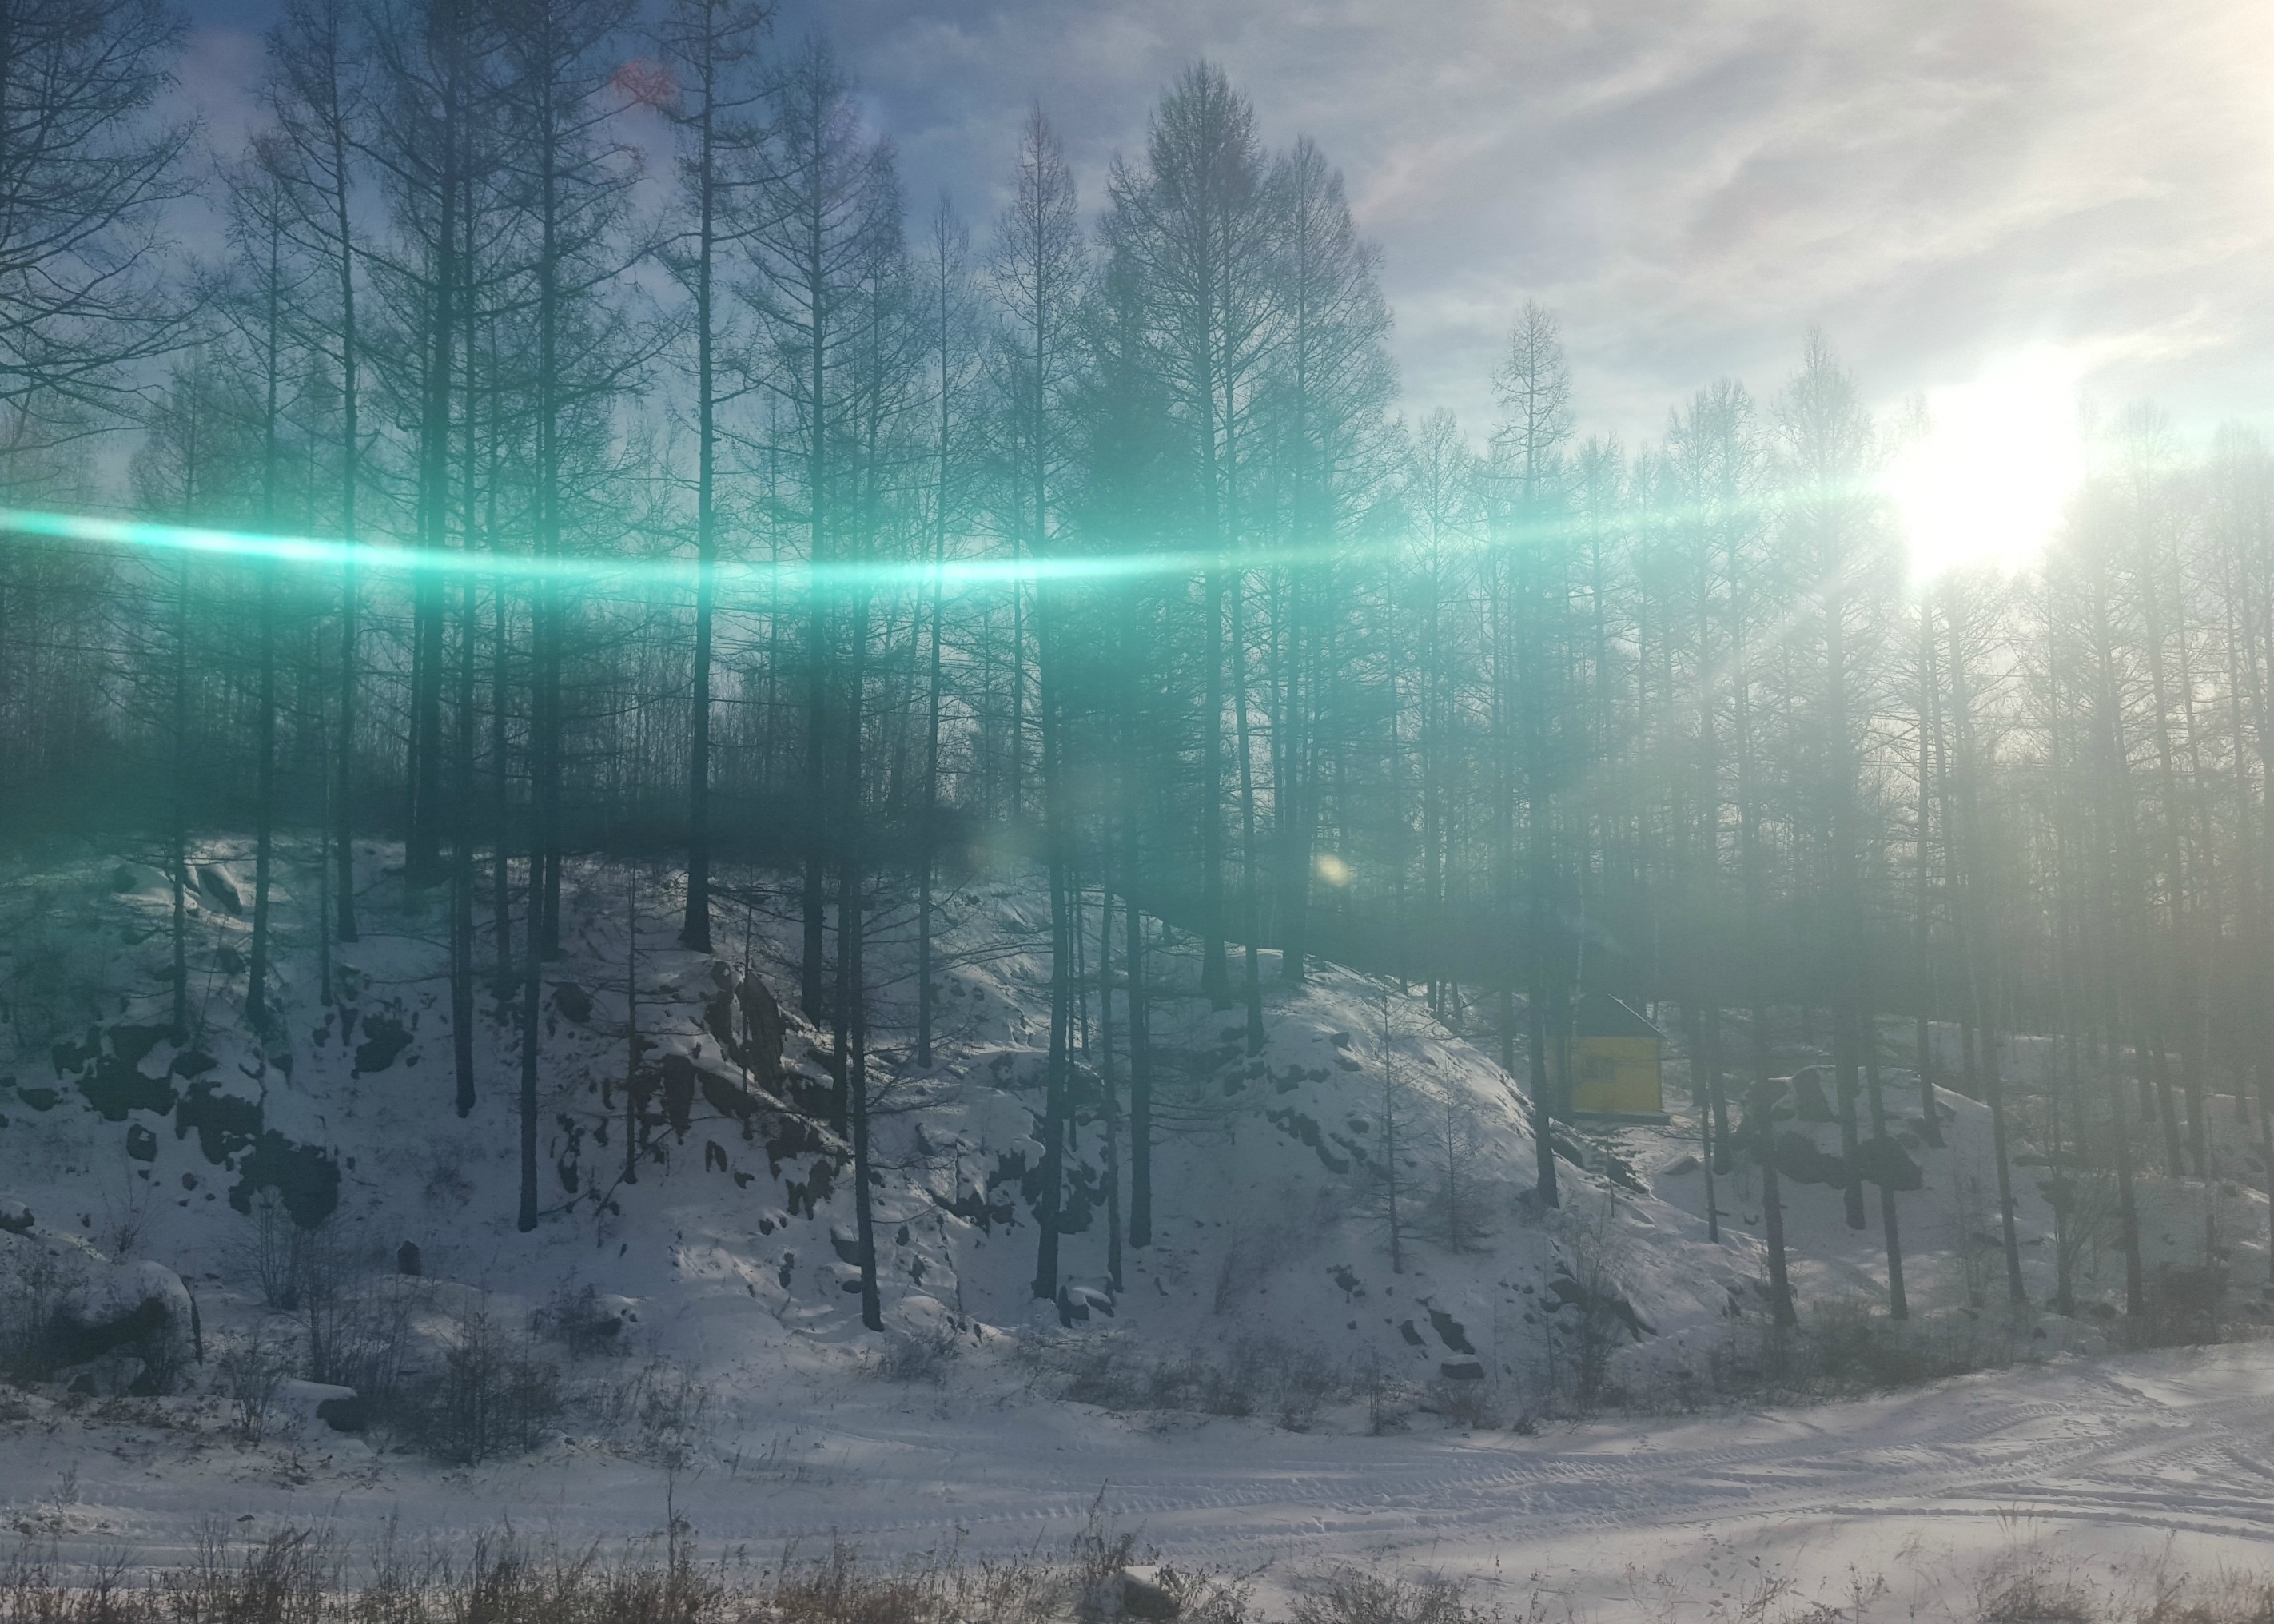 The Trans-Siberian, part 4: Irkutsk to Ulan Ude, or oversized heads and overheated trains